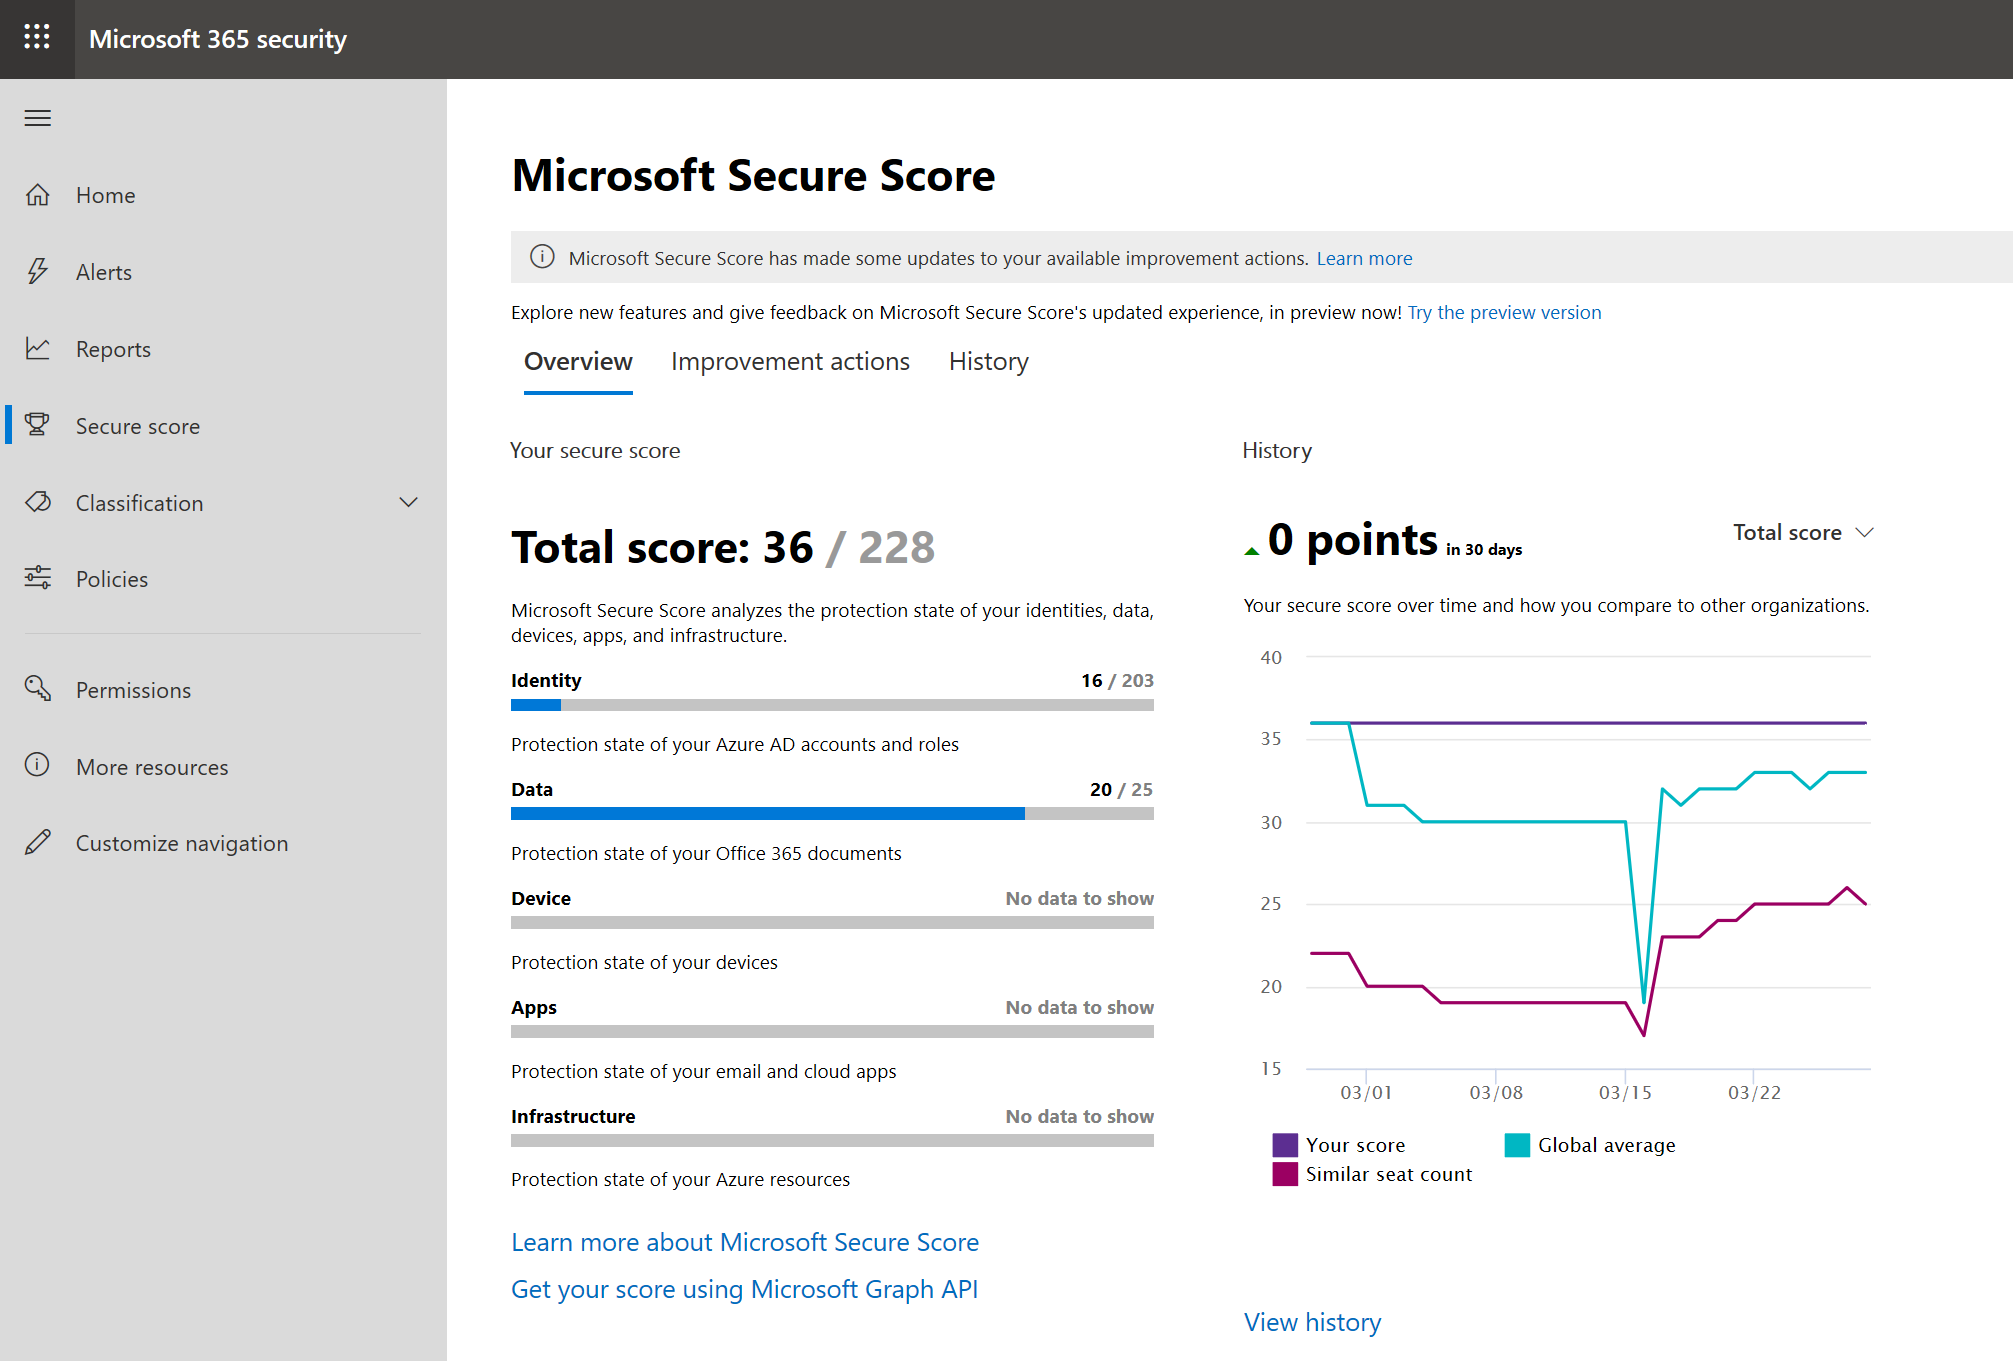 screenshot of the Microsoft Secure Score home page in the Microsoft 365 Security console